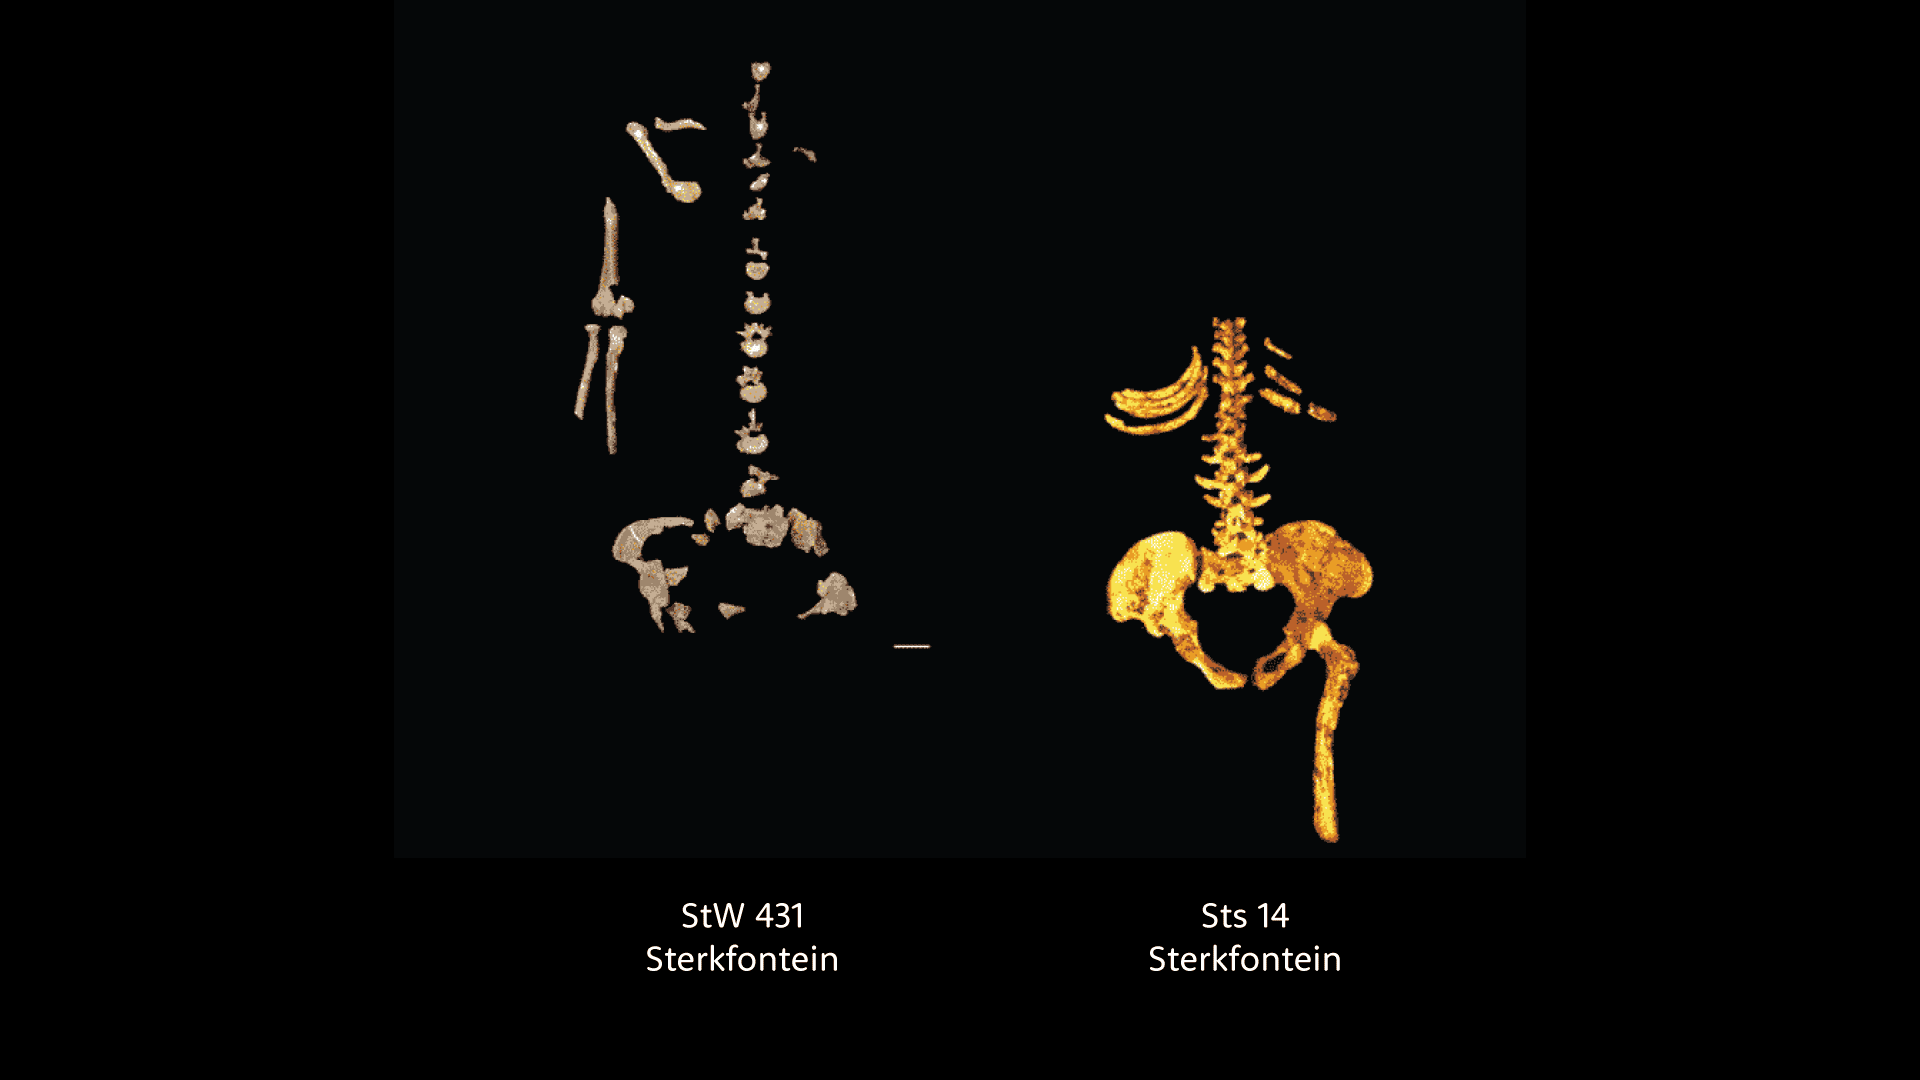 Two partial skeletons, showing vertebrae, some arm bones, and partial pelvis for both